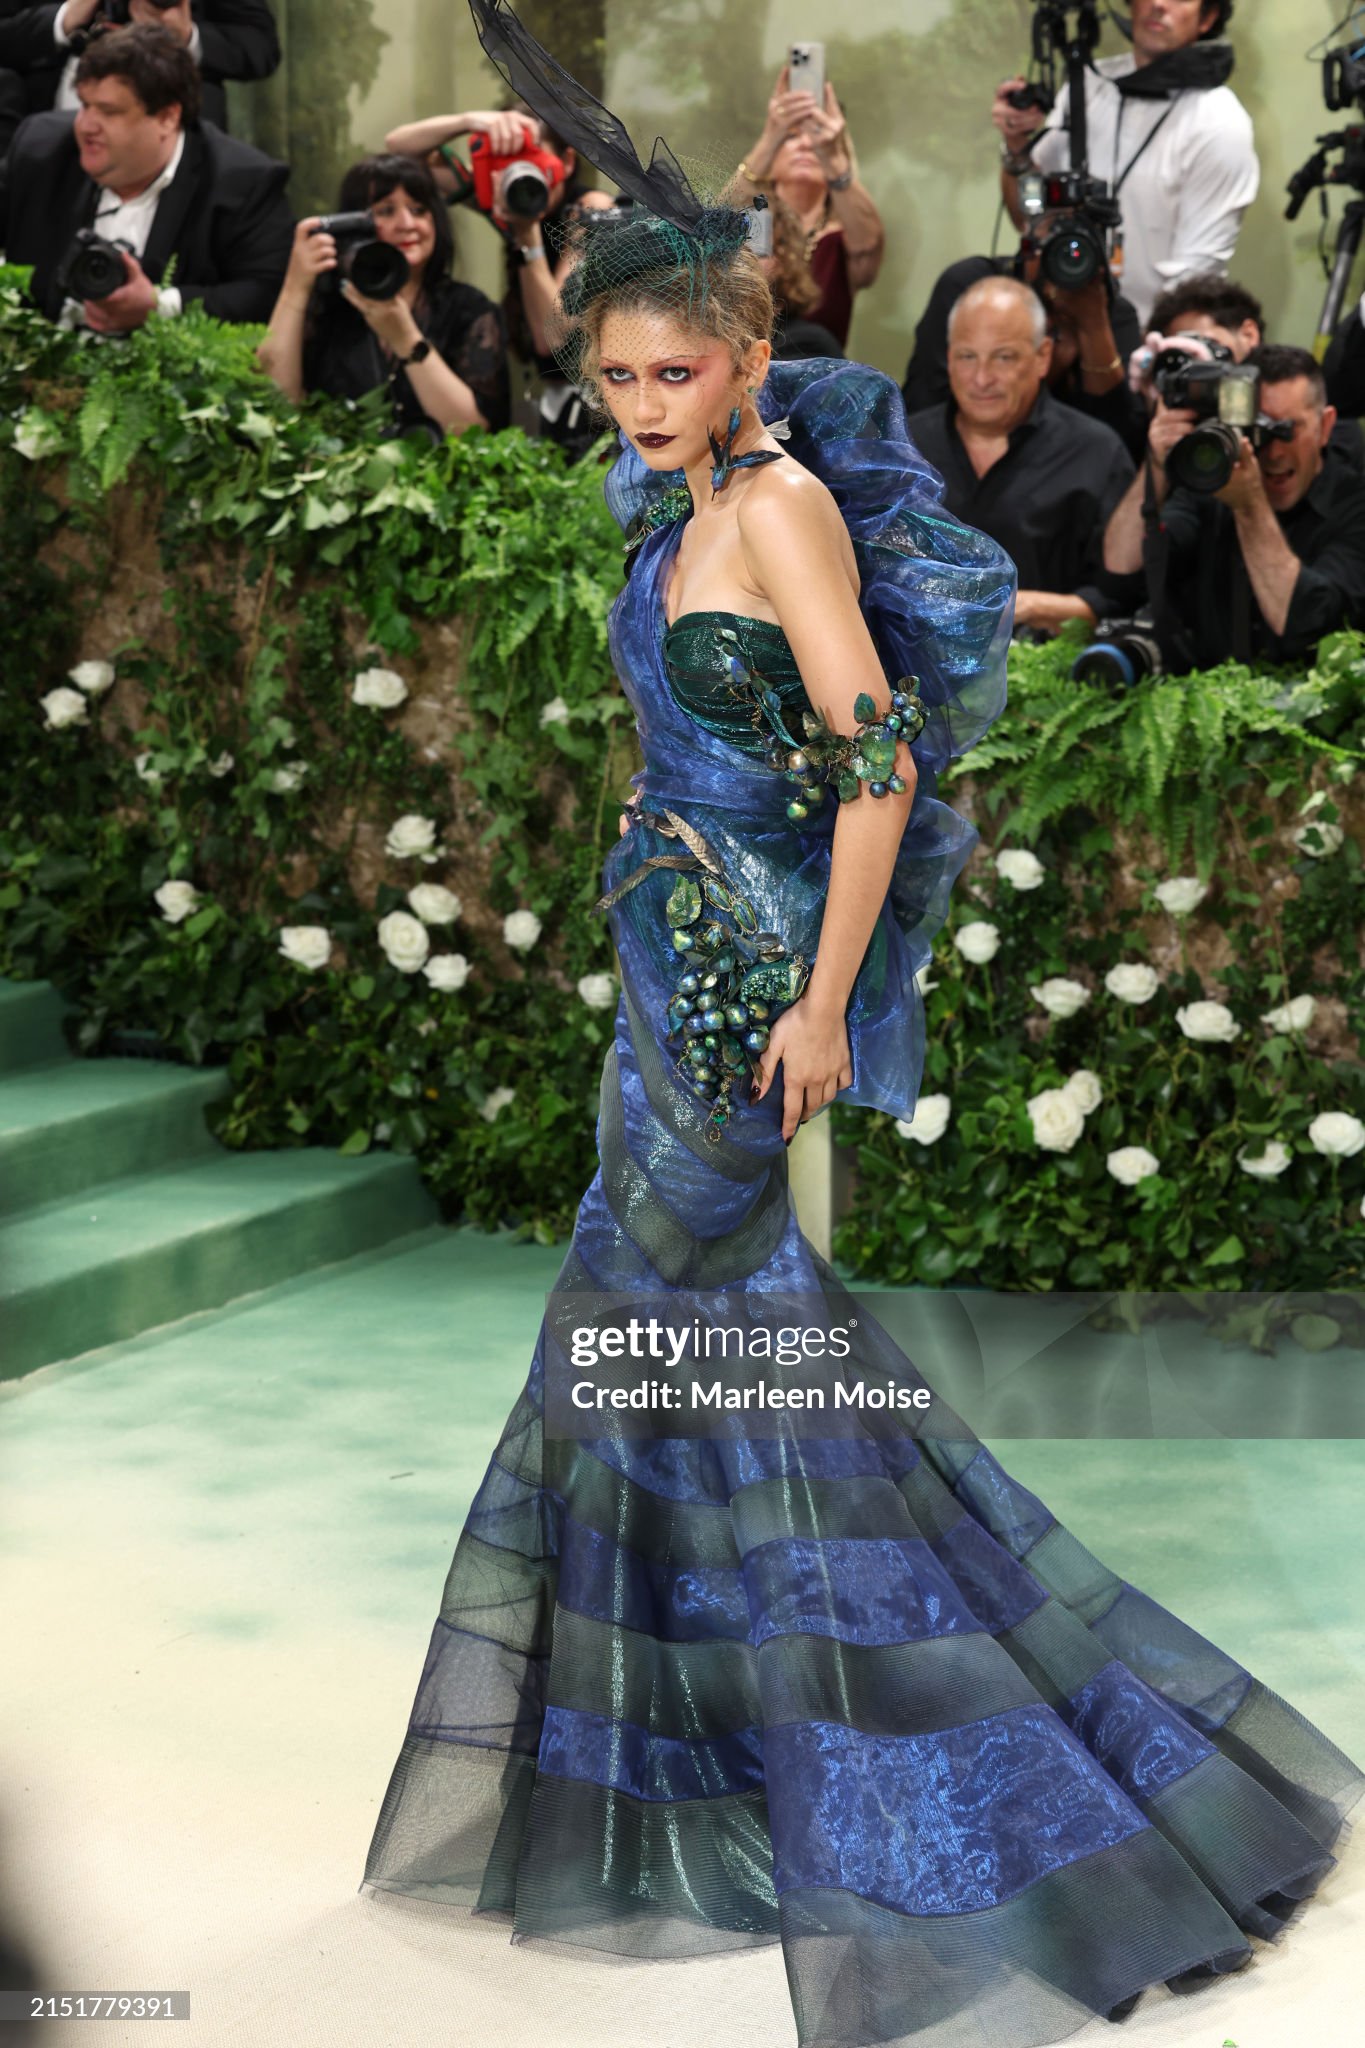 gettyimages-2151779391-2048x2048.jpg